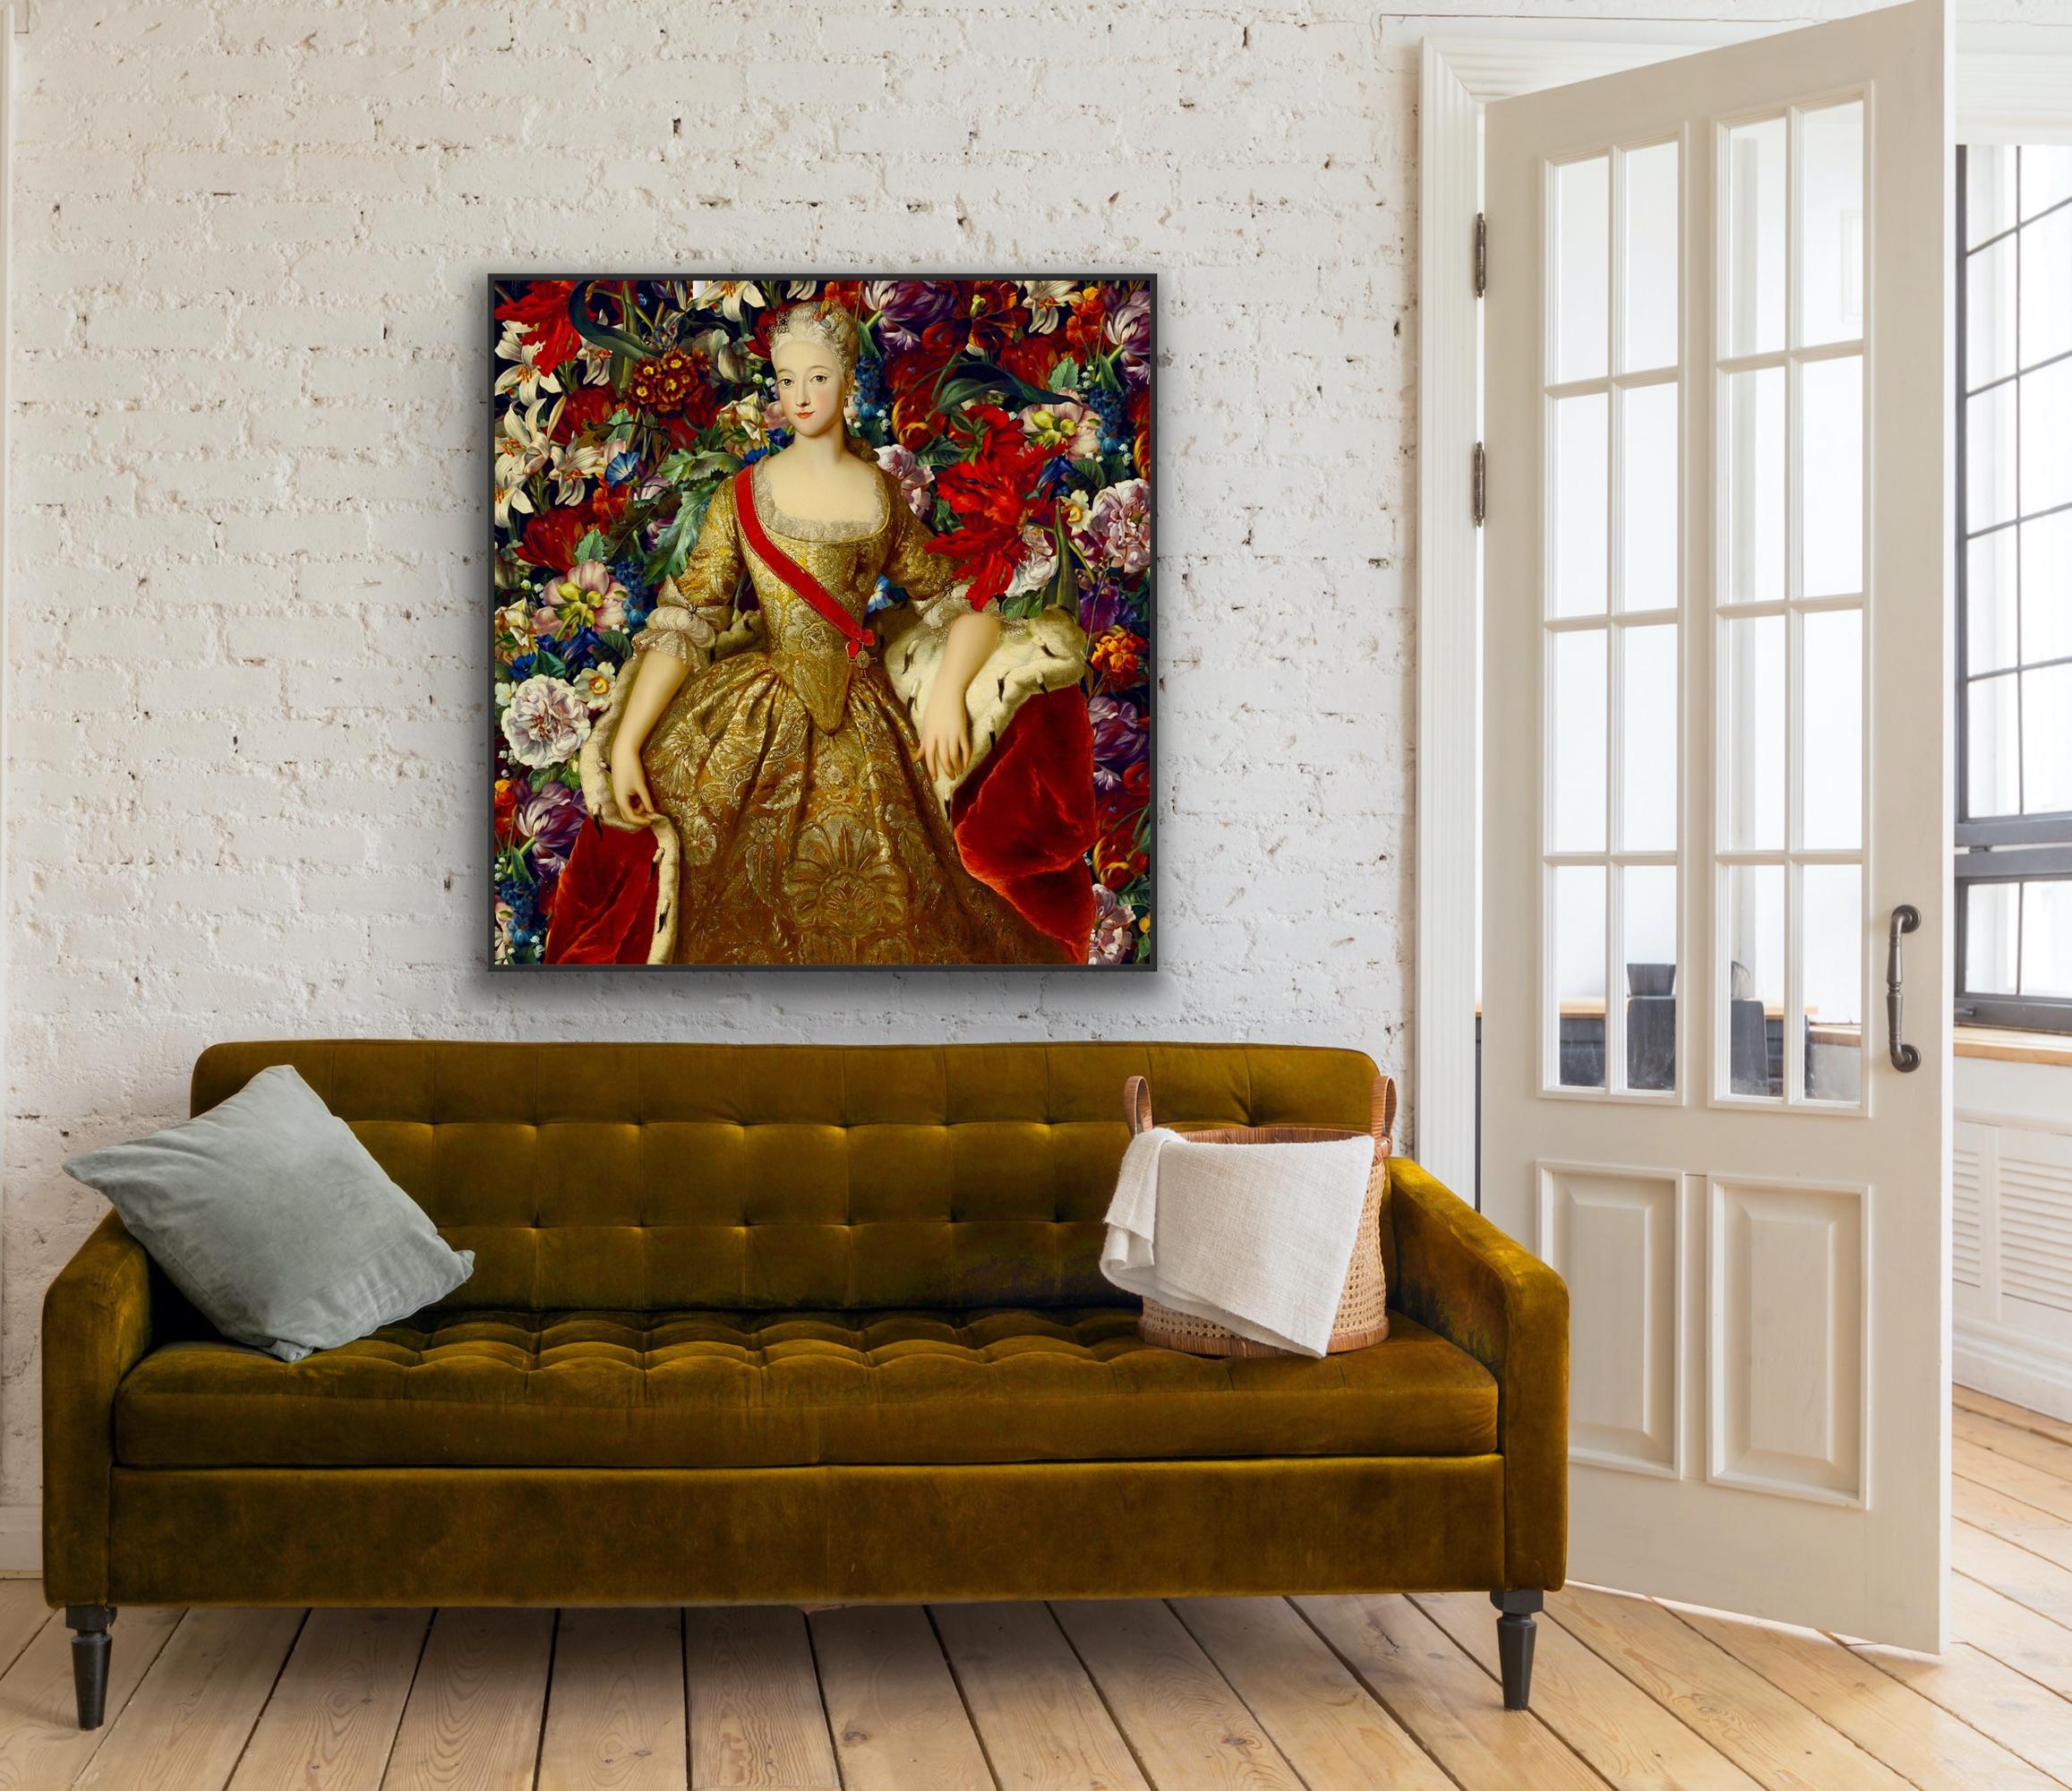 Beauté du XVIIIe siècle 7 by Agent X [2022]
original and hand signed by the artist 
Original Digital artwork on Canvas
Image size: H:147 cm x W:139 cm
Complete Size of Unframed Work: H:147 cm x W:139 cm x D:1cm
Sold Unframed
Please note that insitu